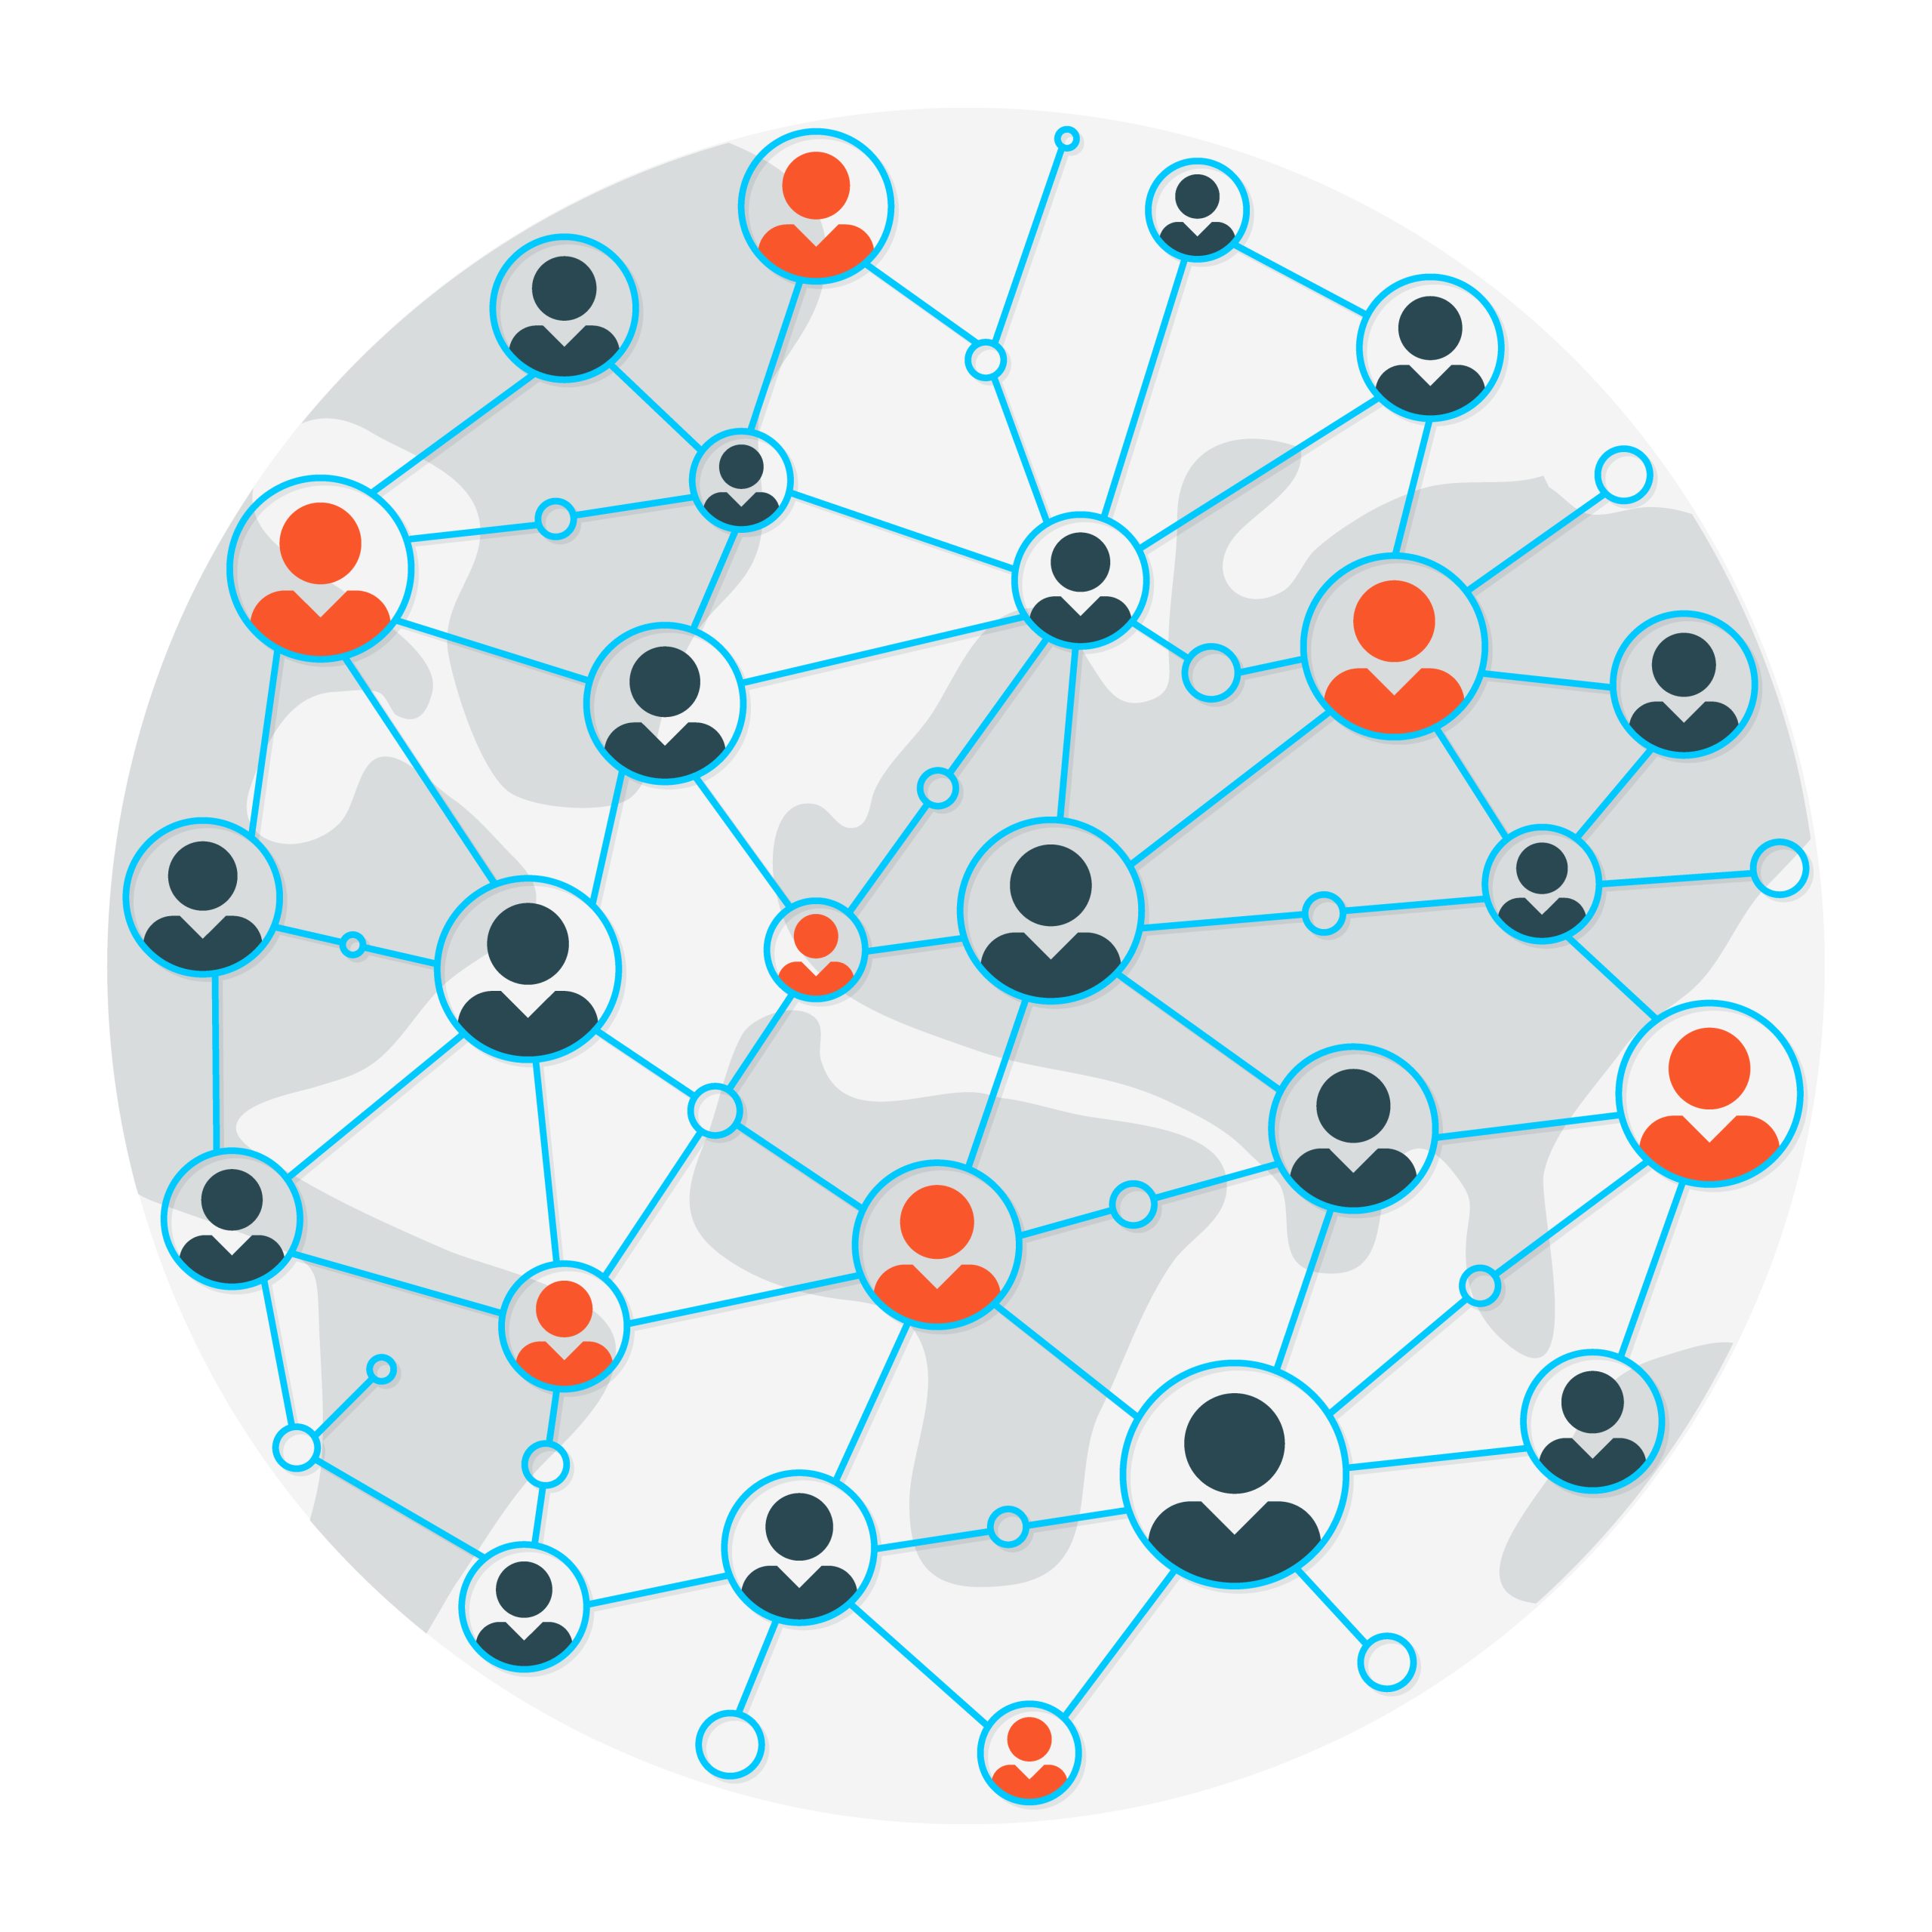 1603.m00.i104.n024.S.c12.136115477 People map. Communication and social networks map icon scaled